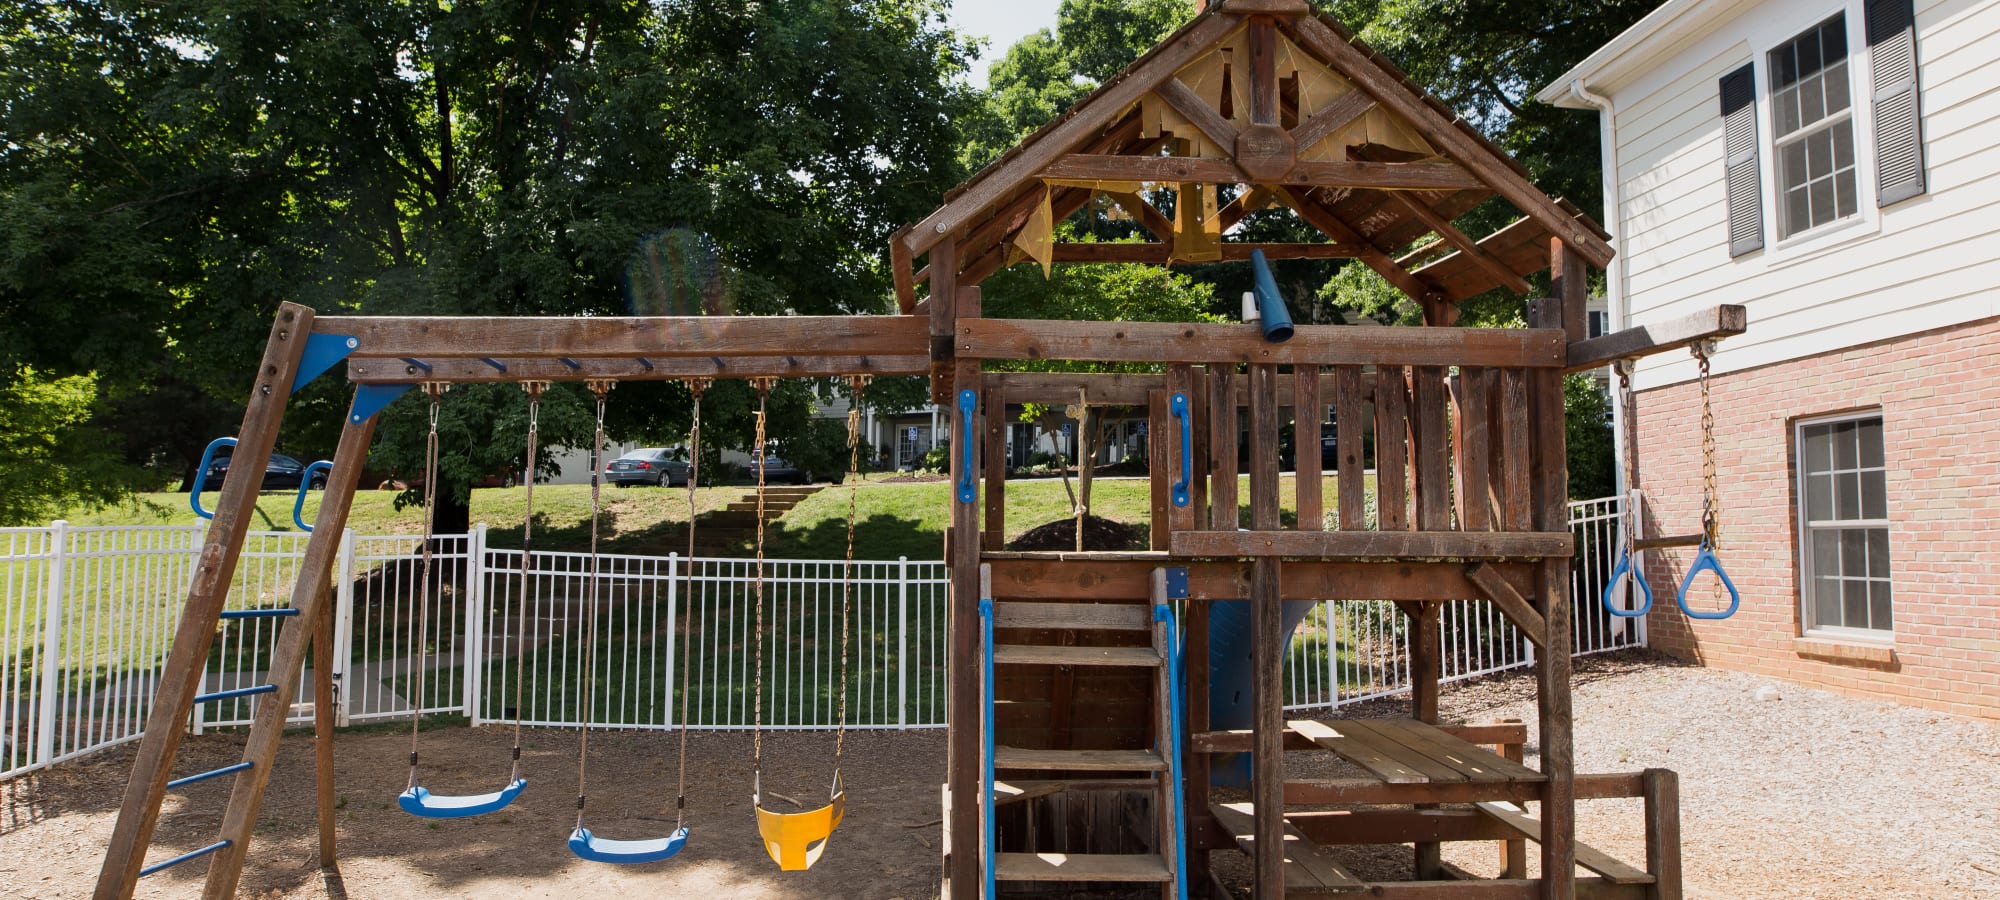 Wooden play structure at Villas at Southern Ridge in Charlottesville, Virginia